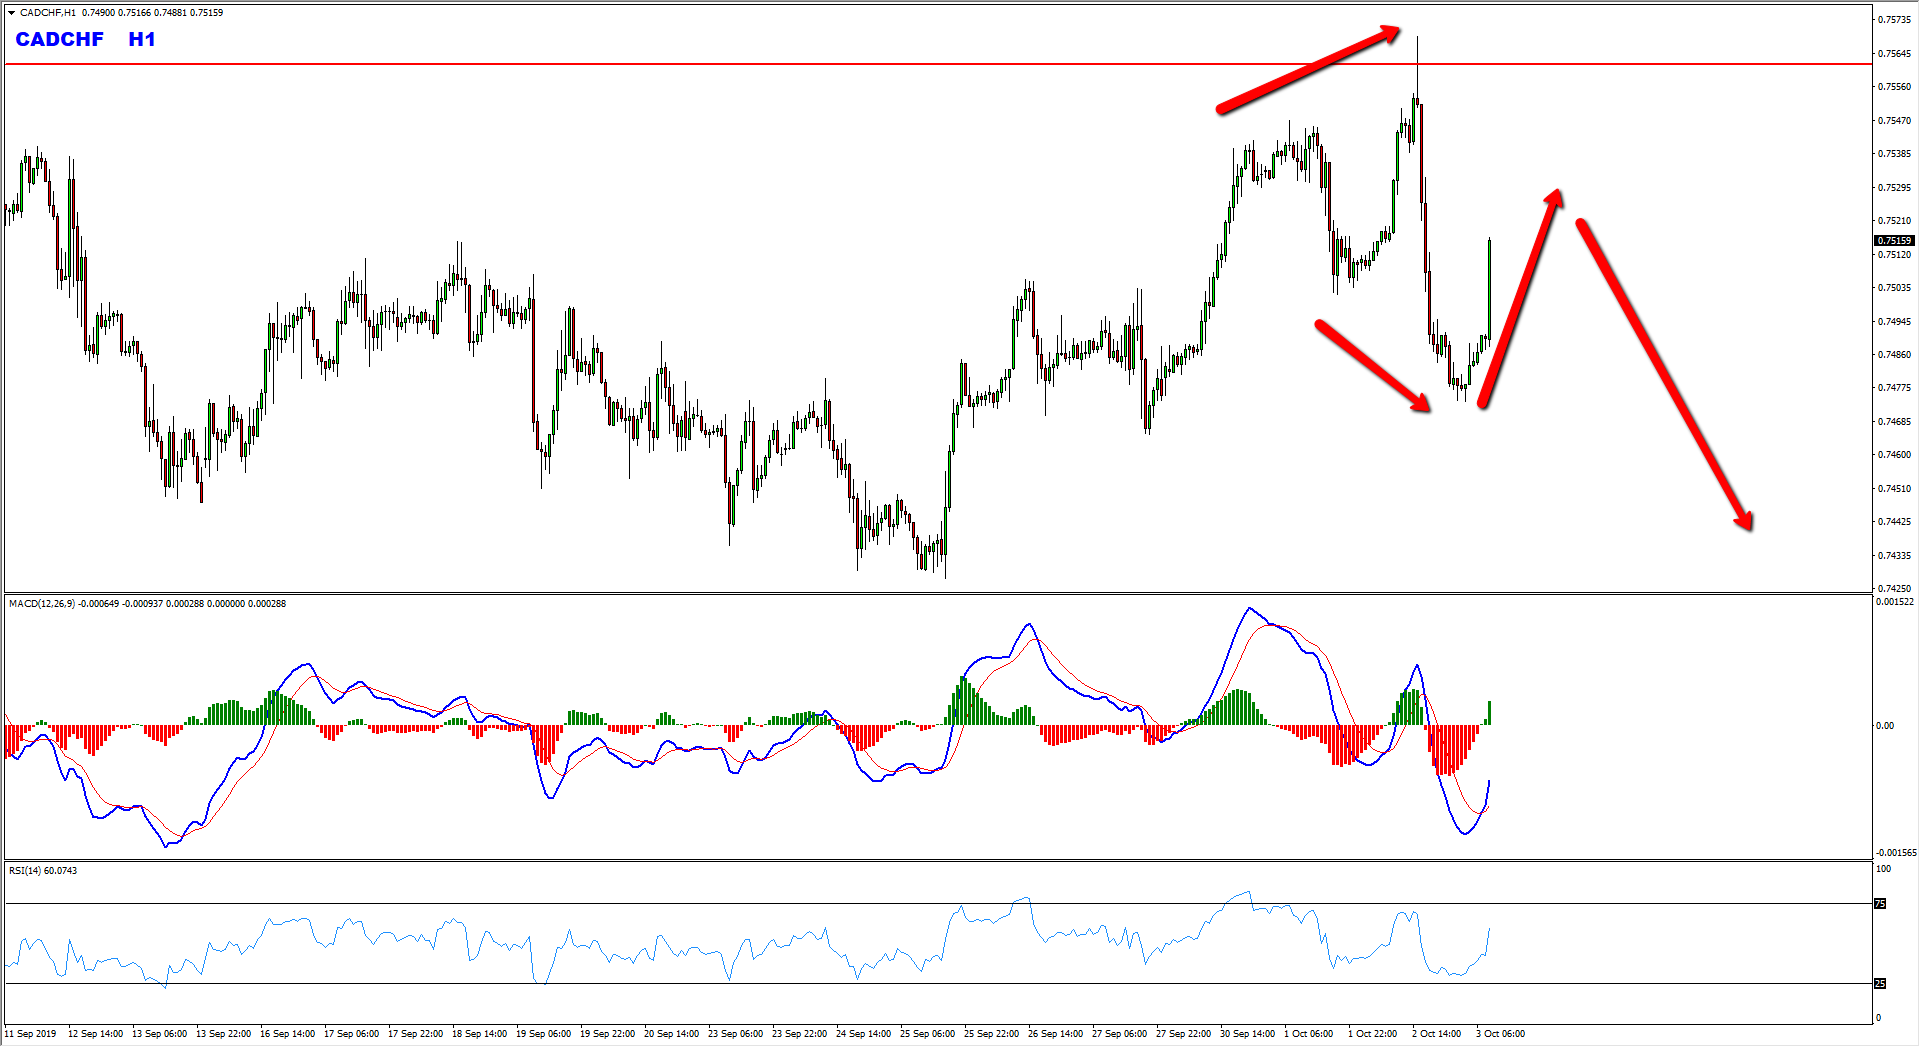 CADCHF Daily Range Provides Sell Opportunity